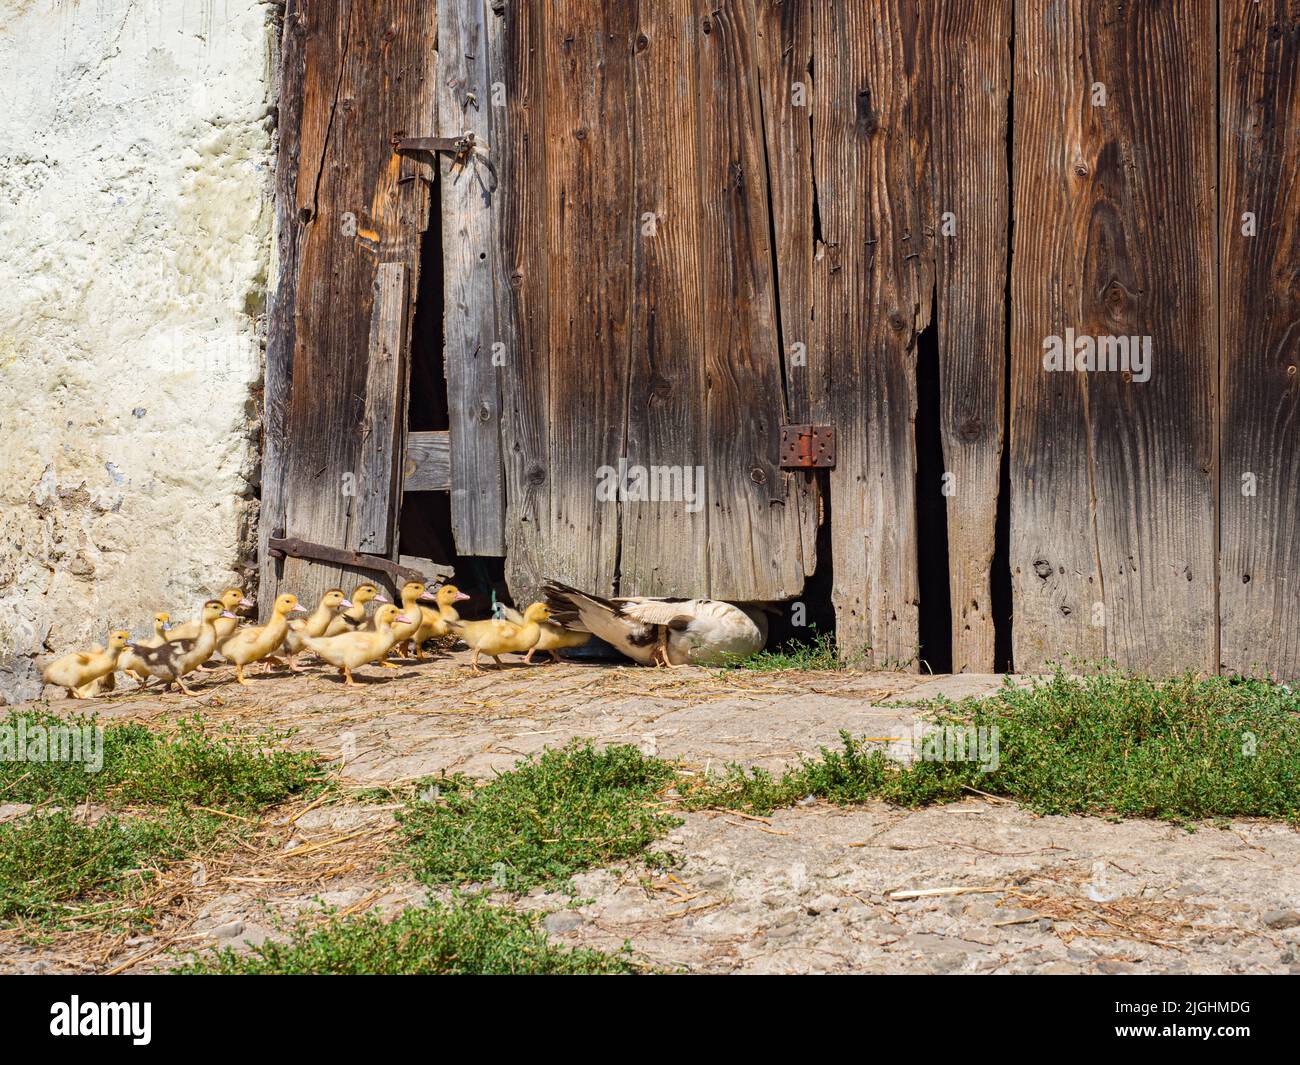 A large duck and a flock of small ducks enter the barn through a hole in the wall Stock Photo